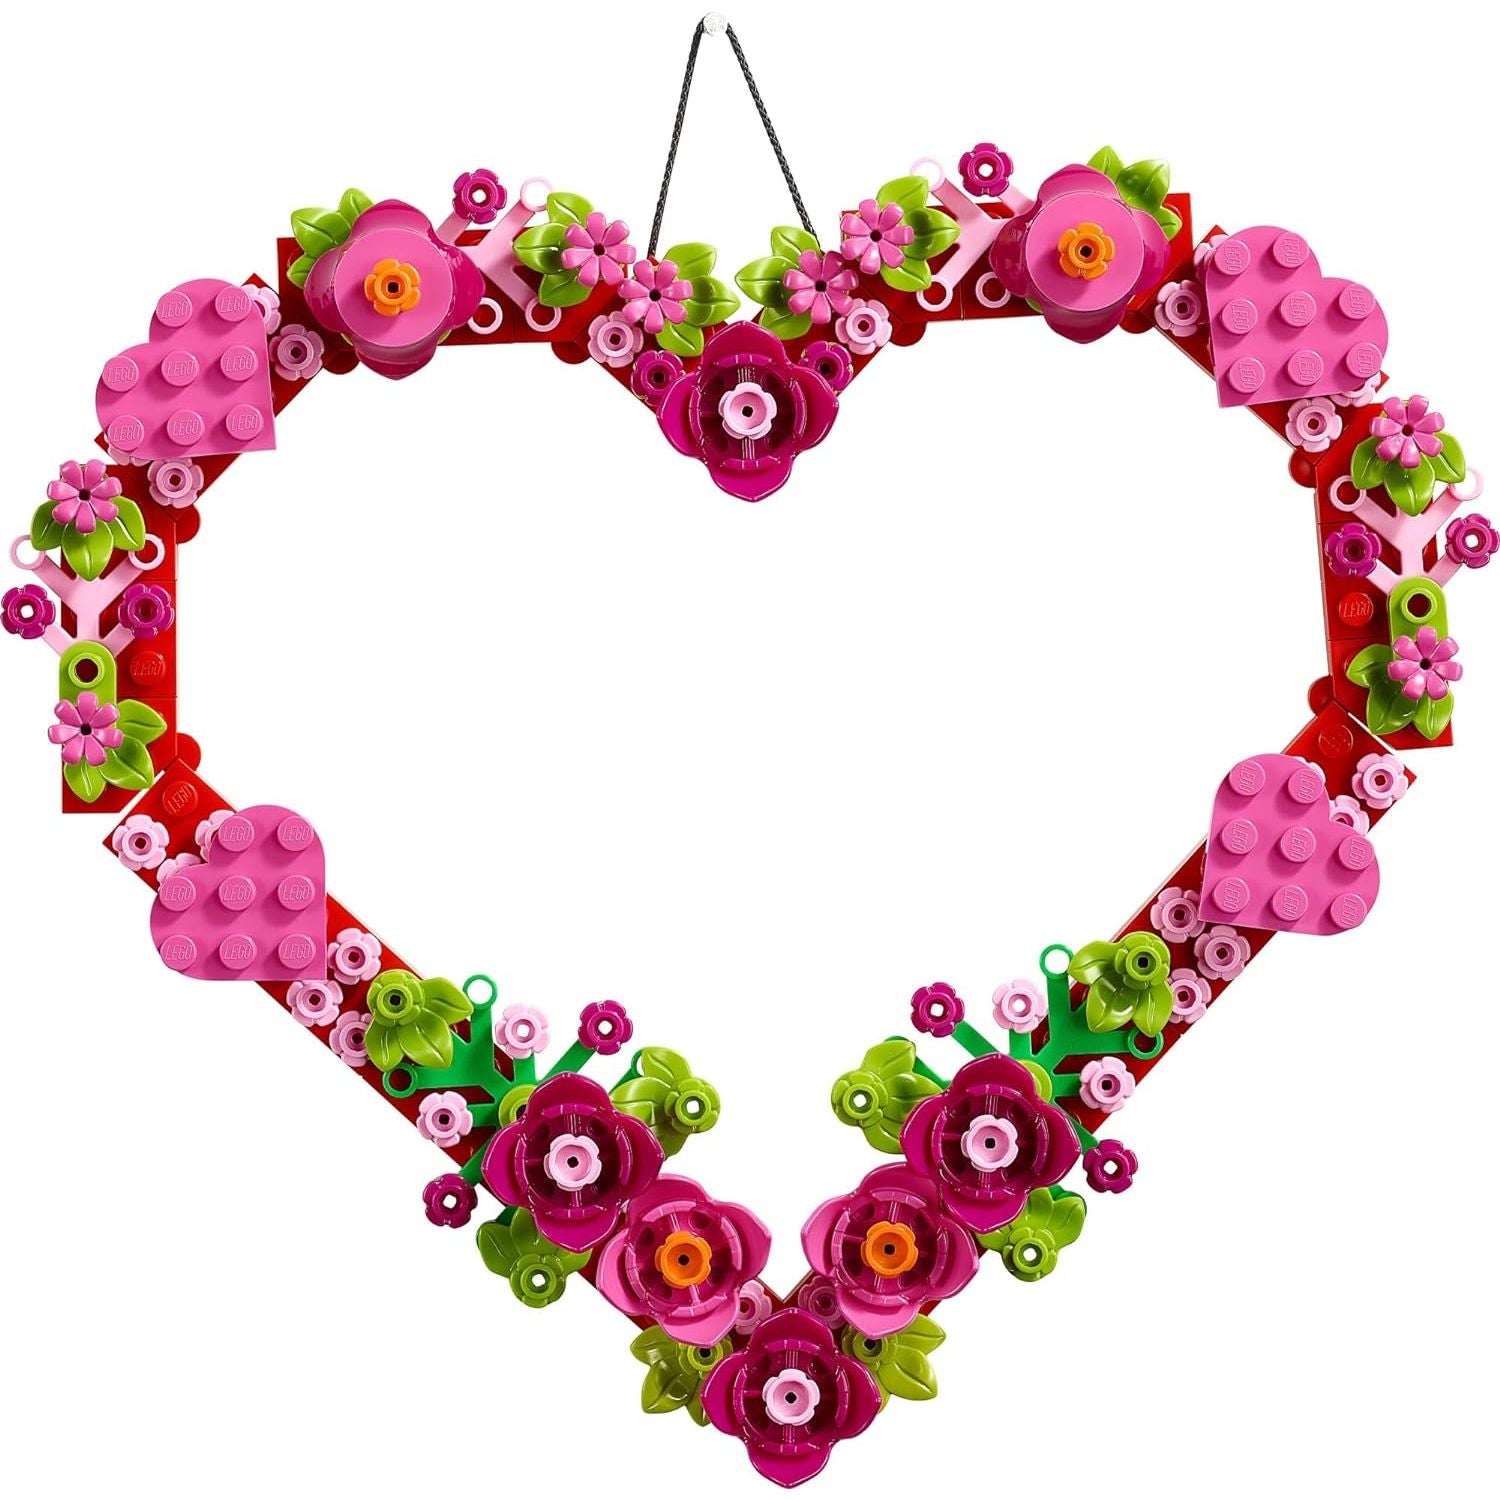 LEGO 40638 Heart Ornament Building Toy Kit, Heart Shaped Arrangement of Artificial Flowers, Great Gift for Loved Ones, Unique Arts & Crafts Activity for Kids.